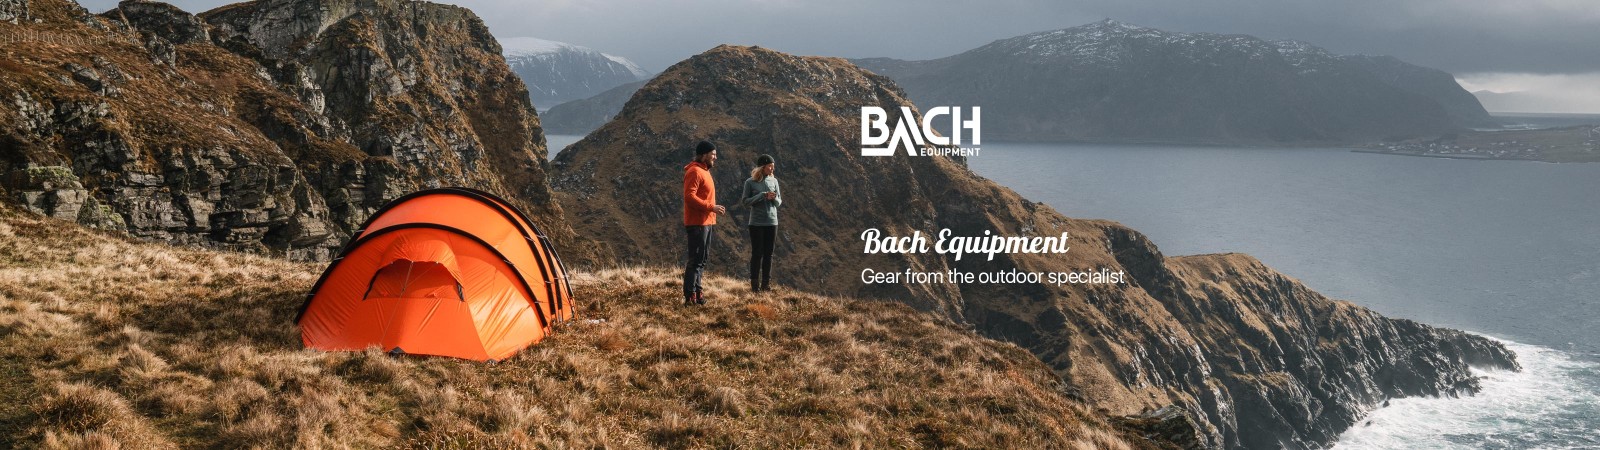 Bach Equipment - Gear from the outdoor specialist